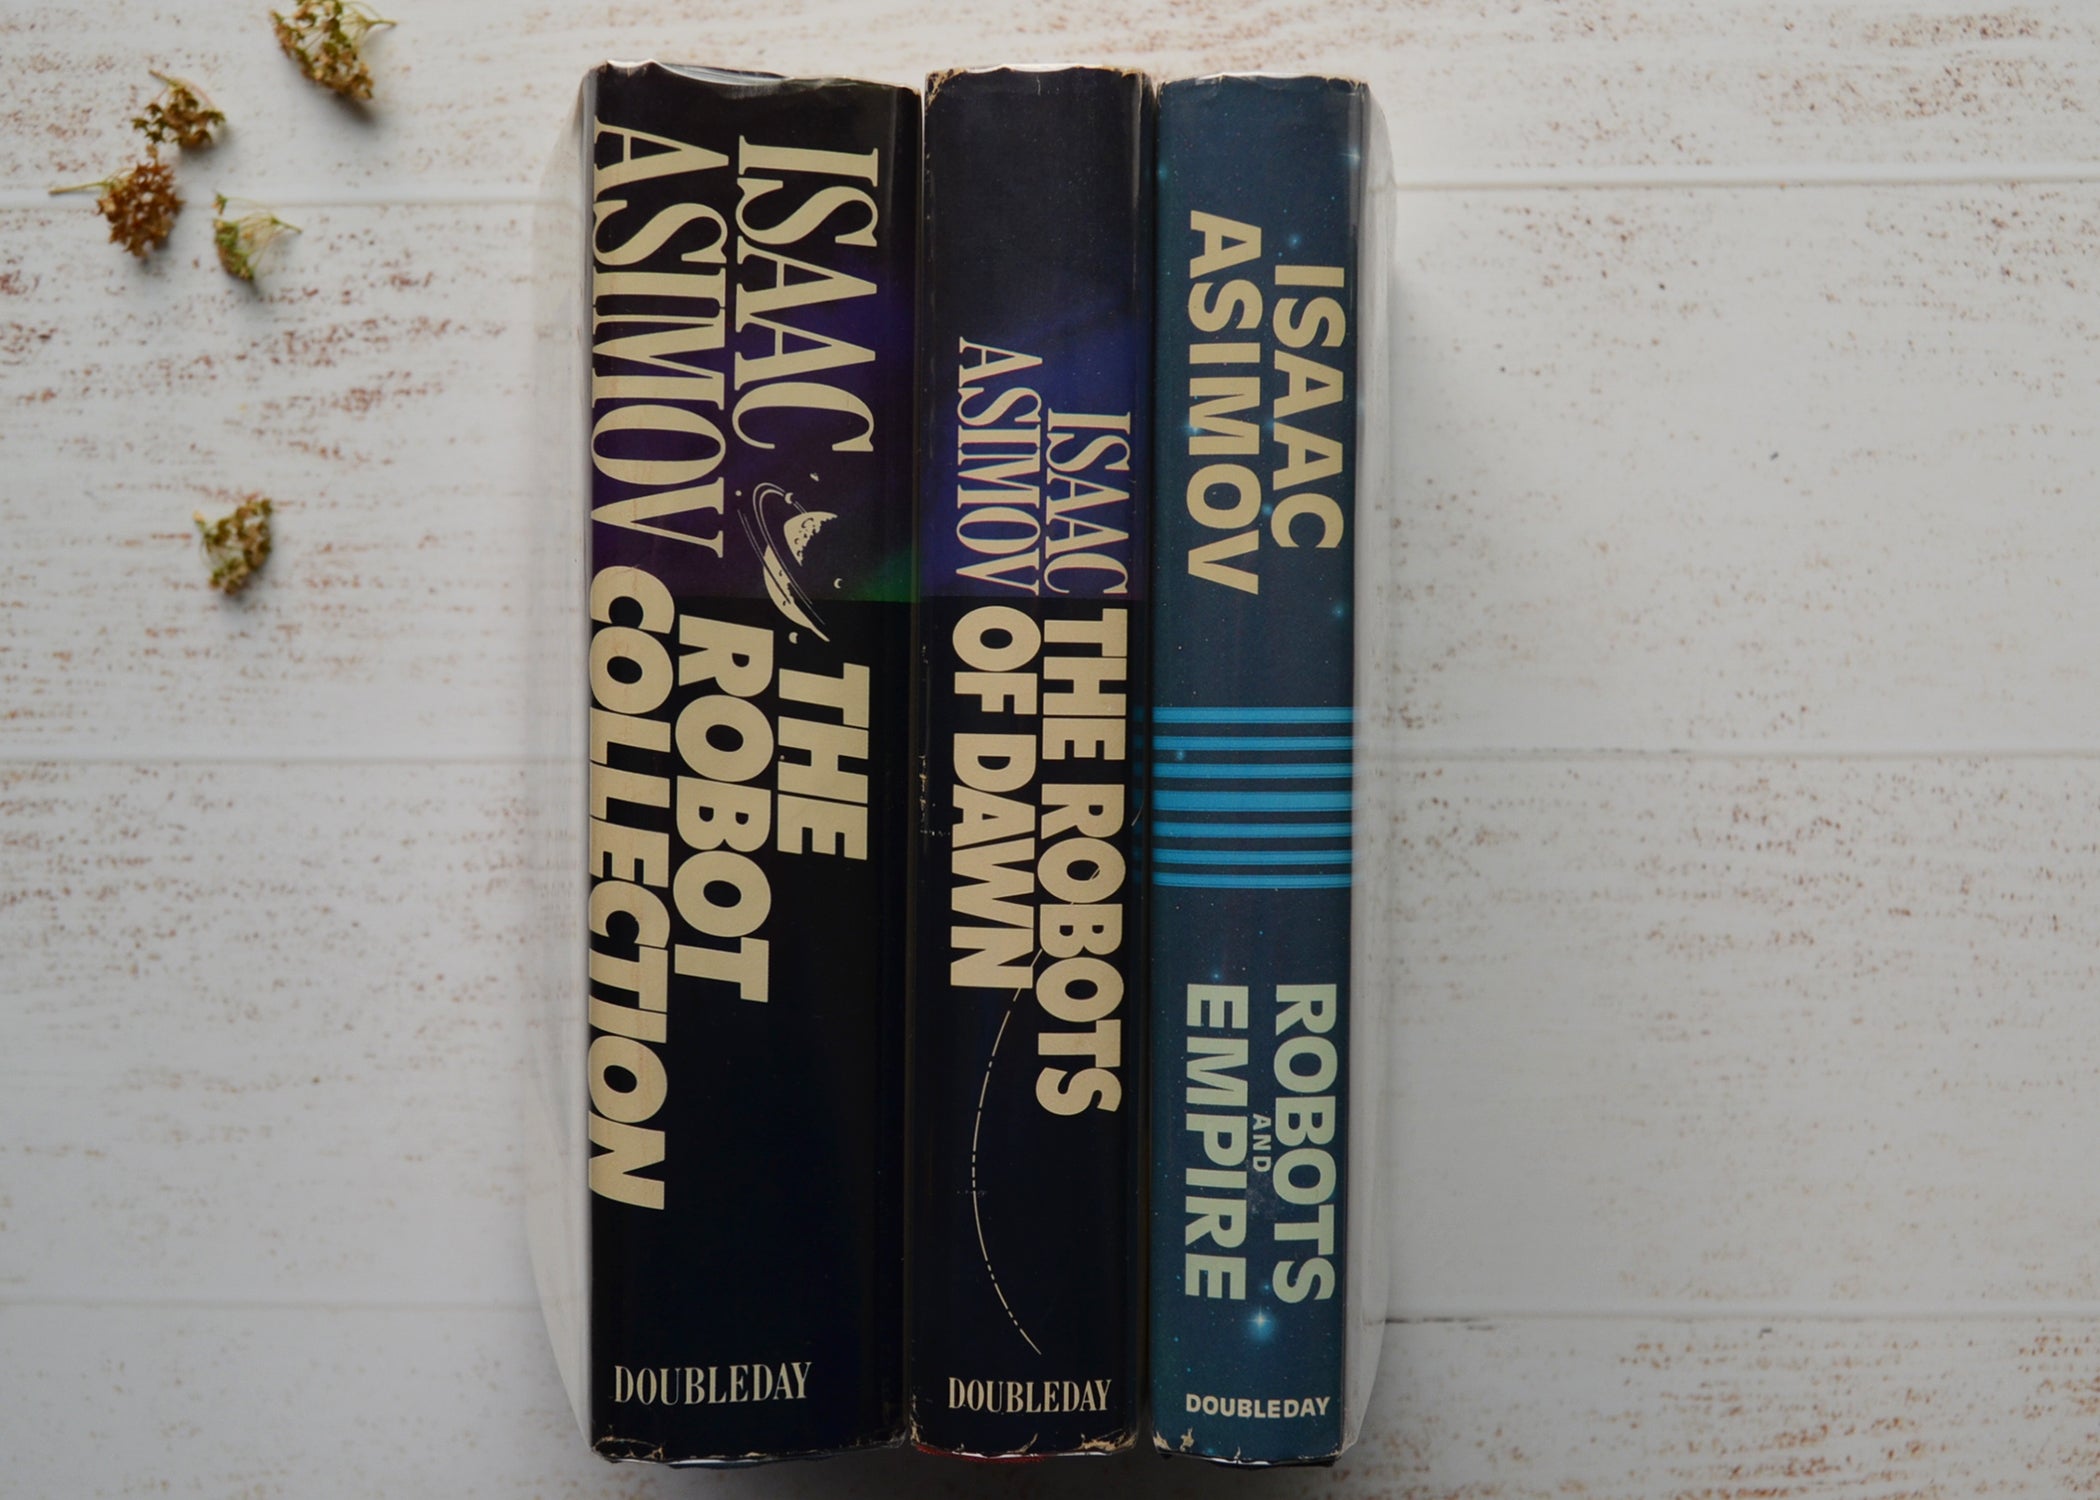 The Complete Robot Series by Isaac Asimov 1982-1985